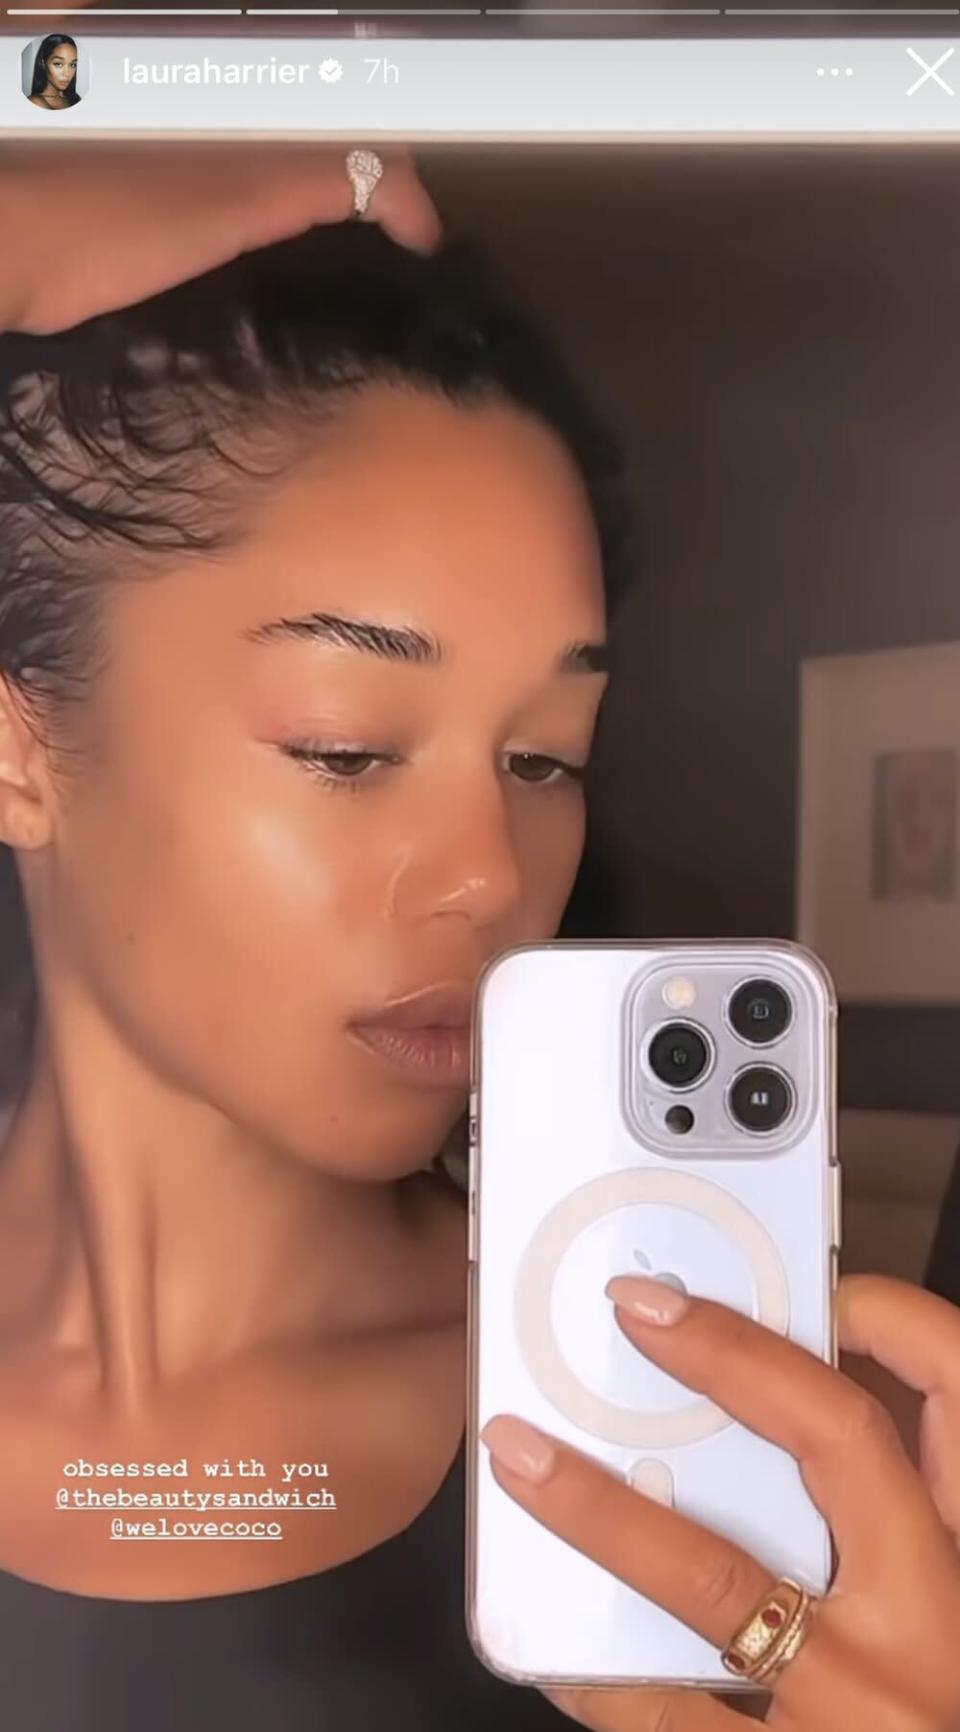 Laura Harrier shows off her pre Met Gala facial by the beauty sandwich on instagram stories